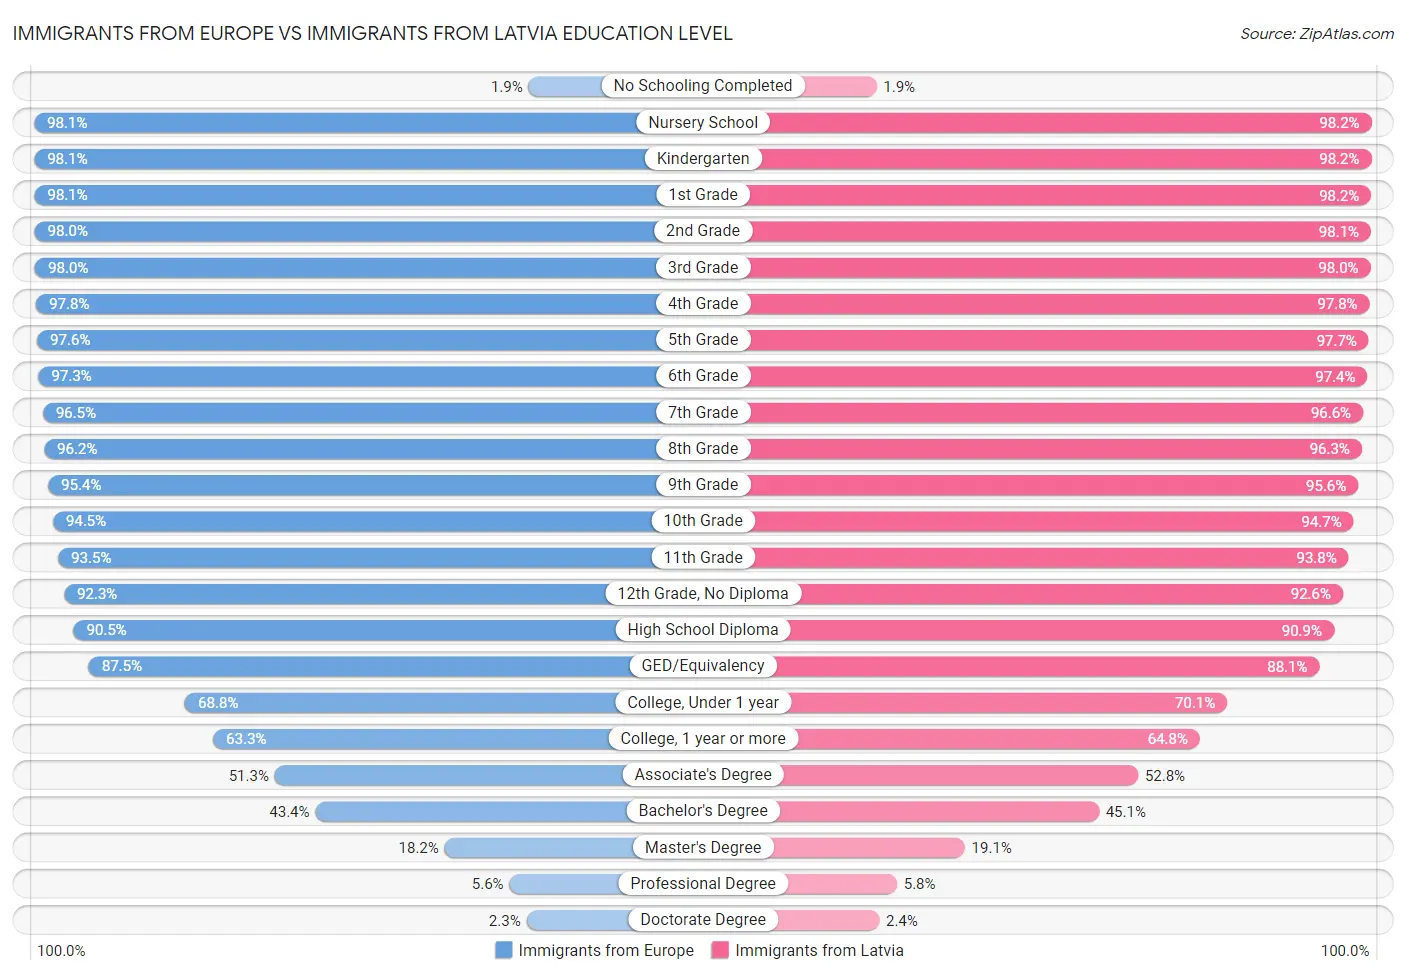 Immigrants from Europe vs Immigrants from Latvia Education Level